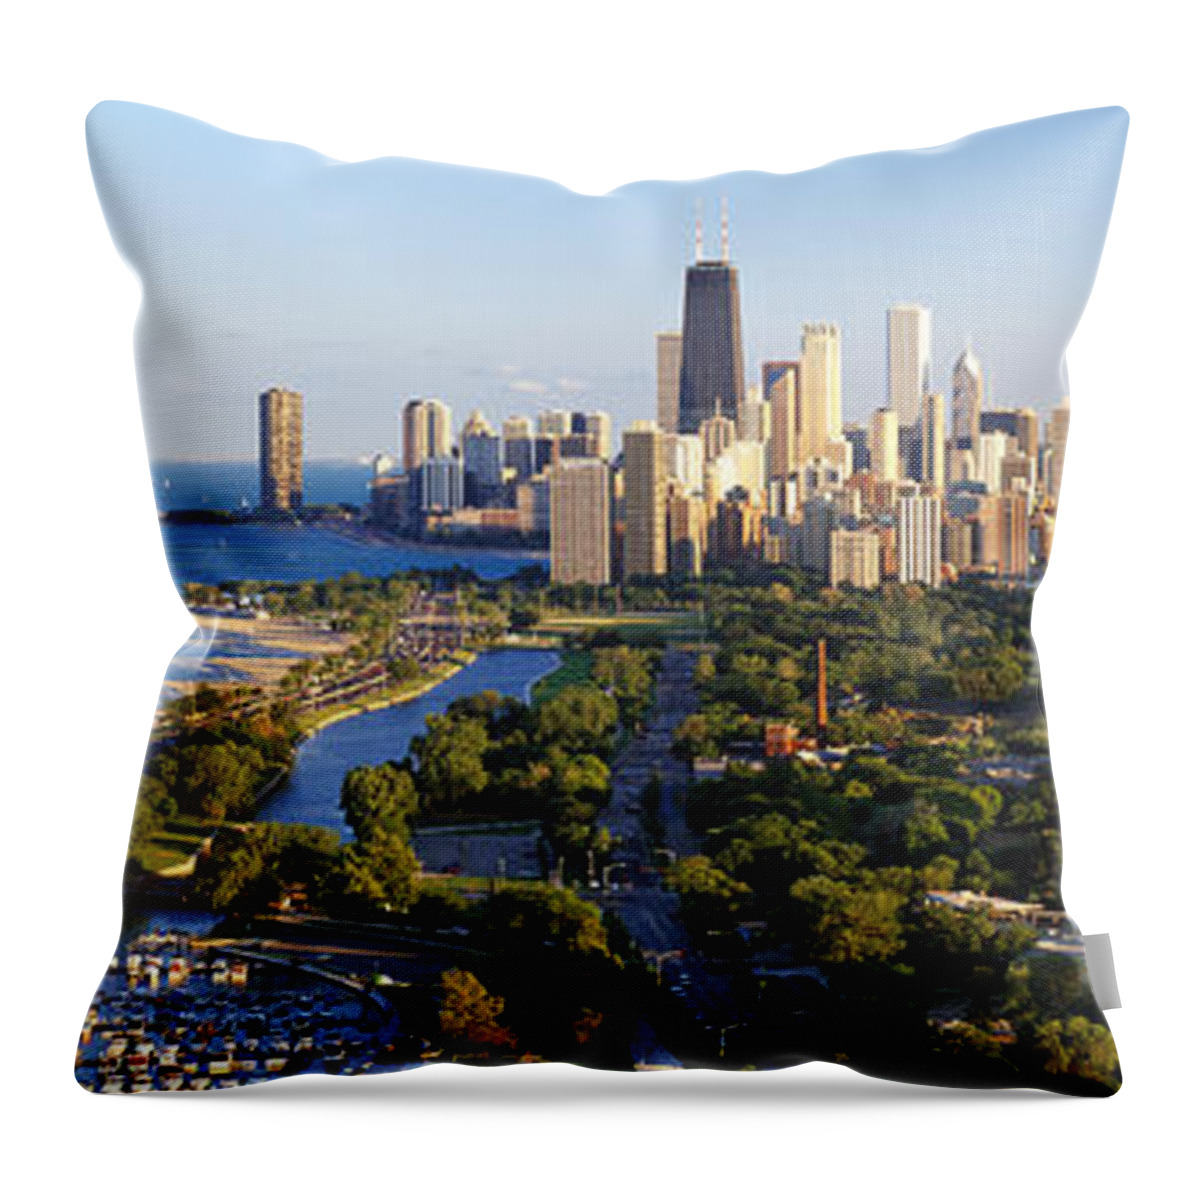 Photography Throw Pillow featuring the photograph Usa, Illinois, Chicago by Panoramic Images